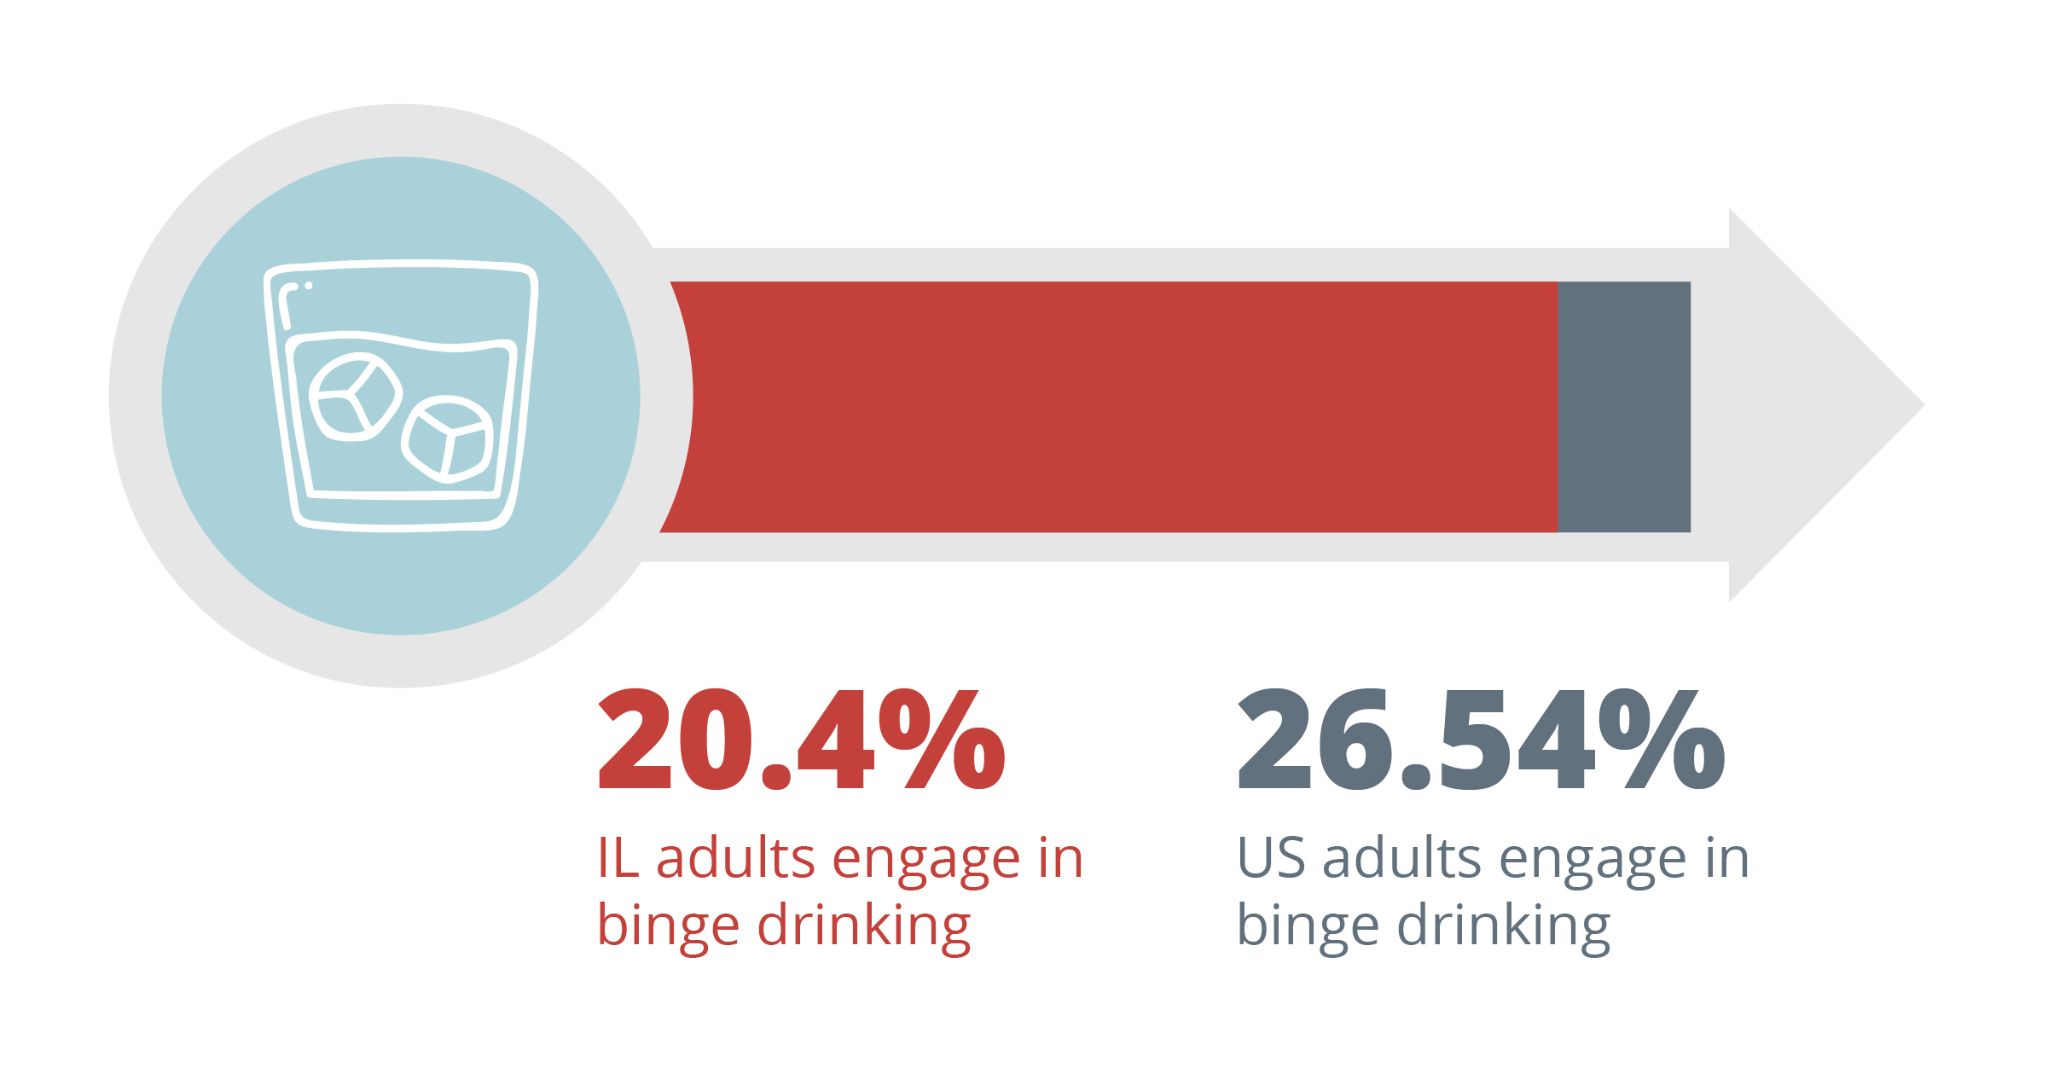 20.4% of illinois adults engage in binge drinking. 26.54% of American adults engage in binge drinking. Drug And Alcohol Detox & Rehab, Addiction Treatment Resources in Springfield Illinois